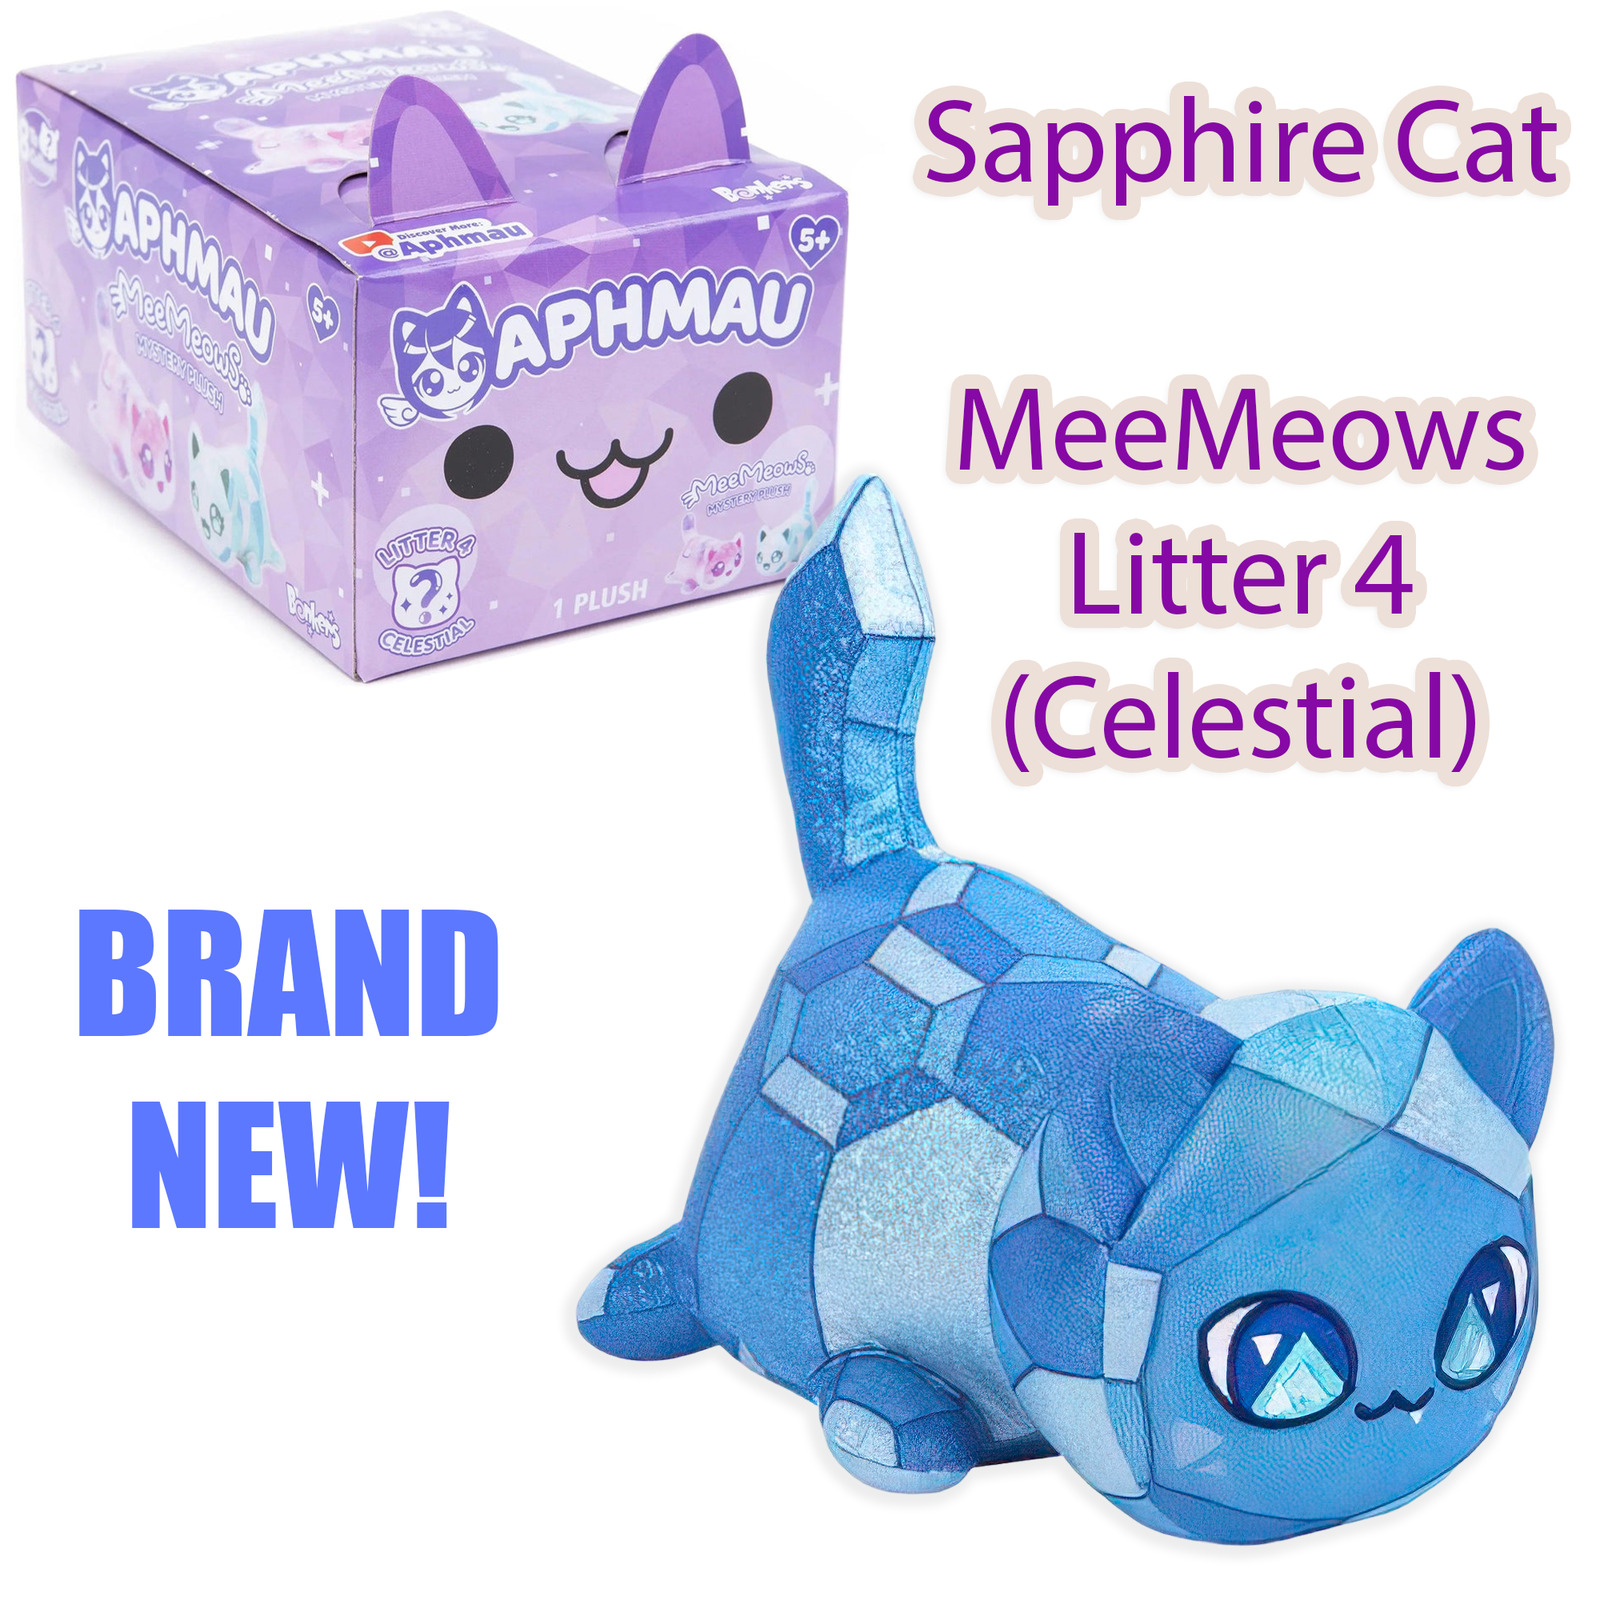 SAPPHIRE CAT - MeeMeows Litter 4 from Aphmau (BRAND NEW) Cute Kitty Plushie